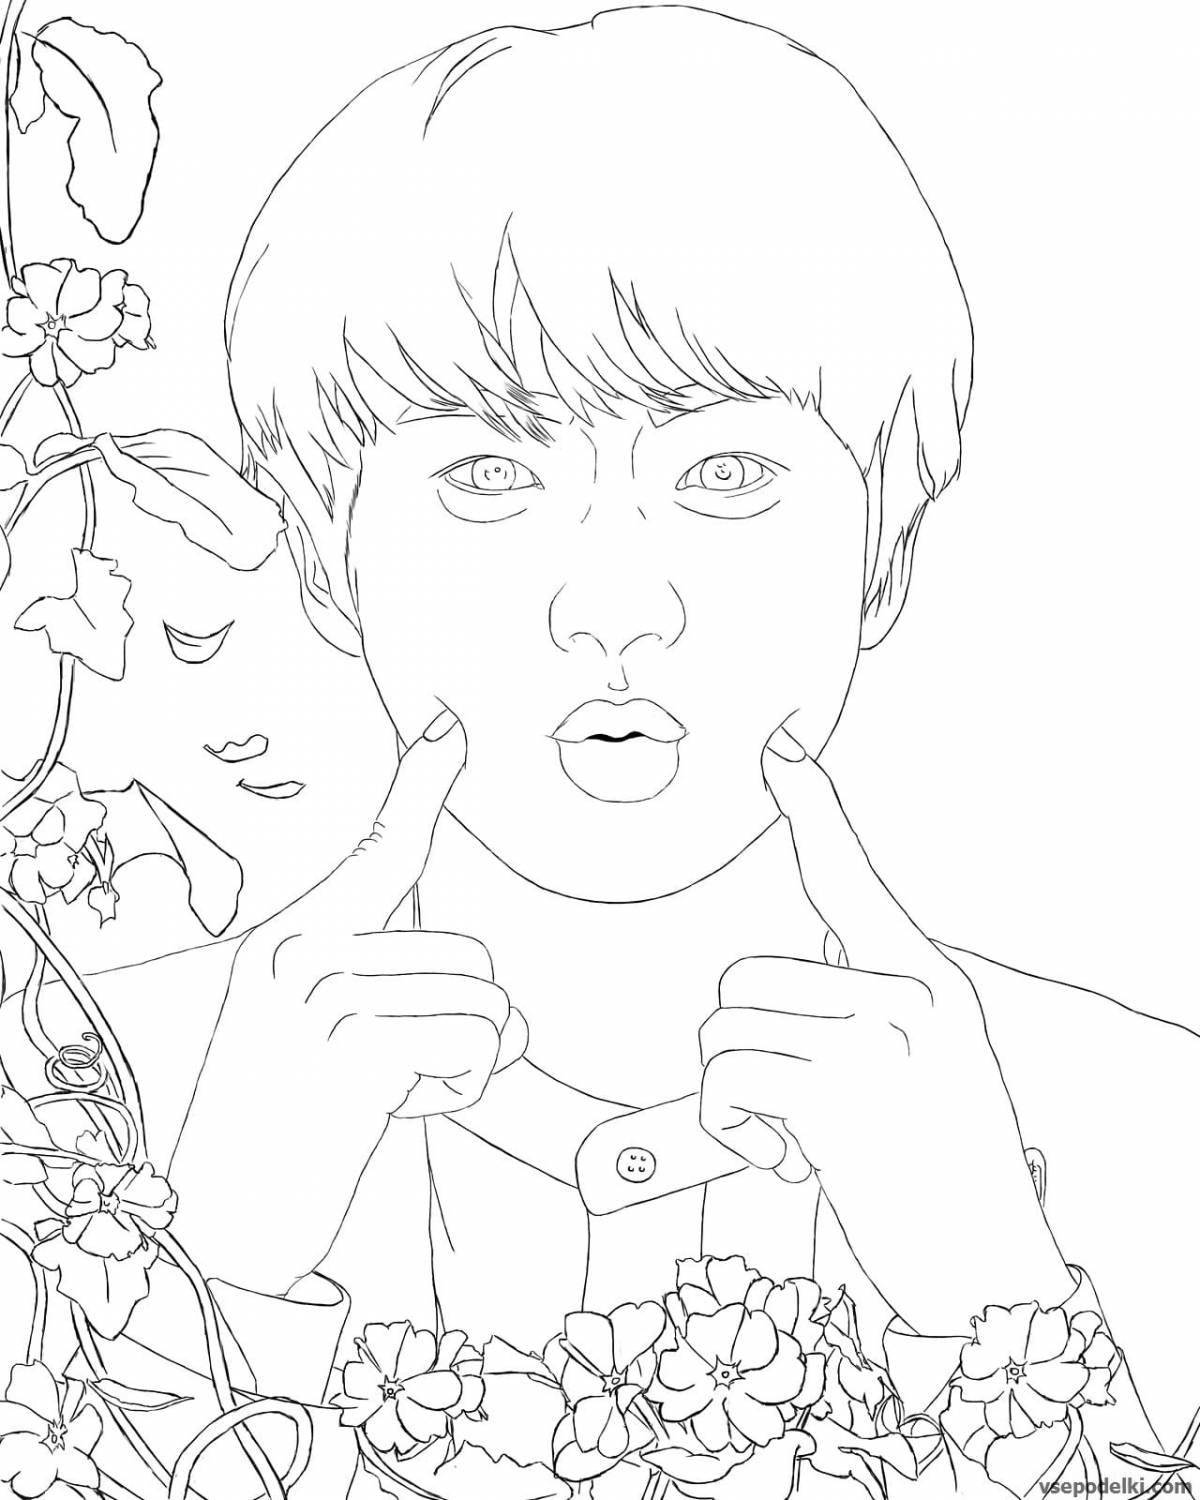 Bts game coloring page